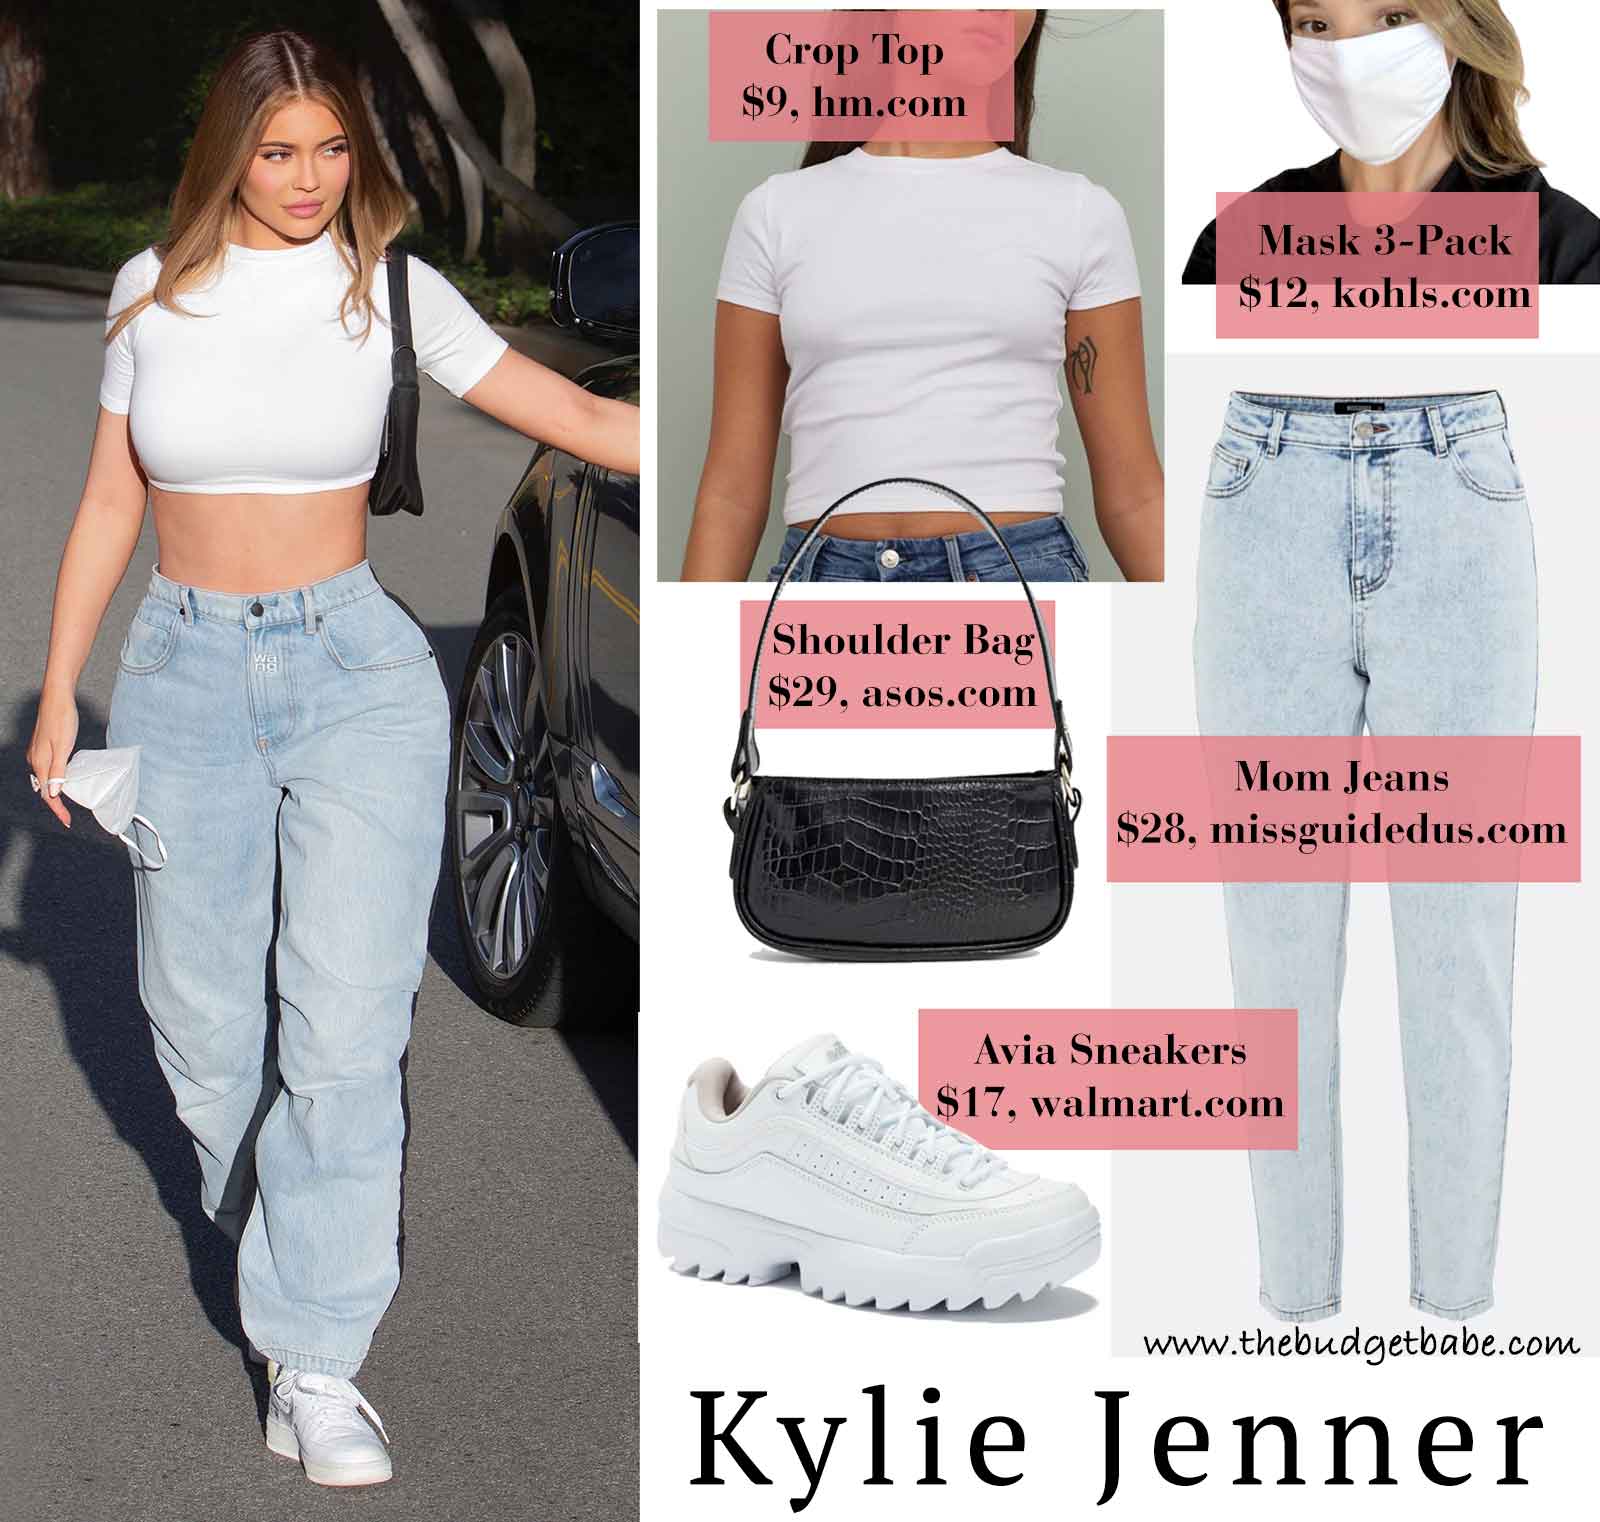 Kylie Jenner's mom jeans and Nike Air Force 1 look for less